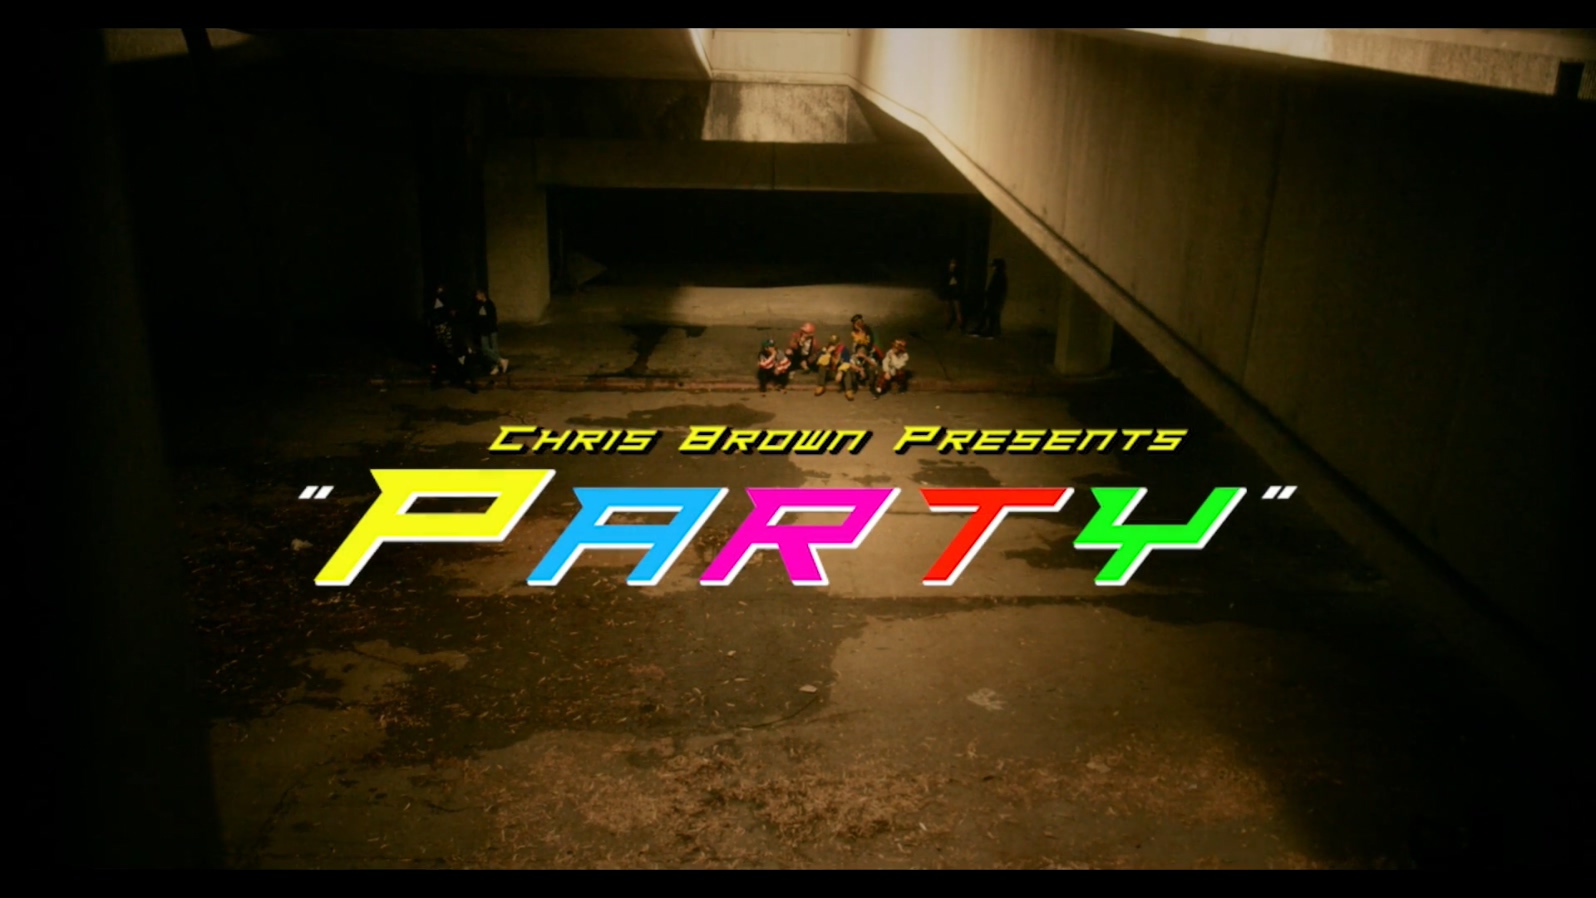 Chris Brown - Party ft. Gucci Man